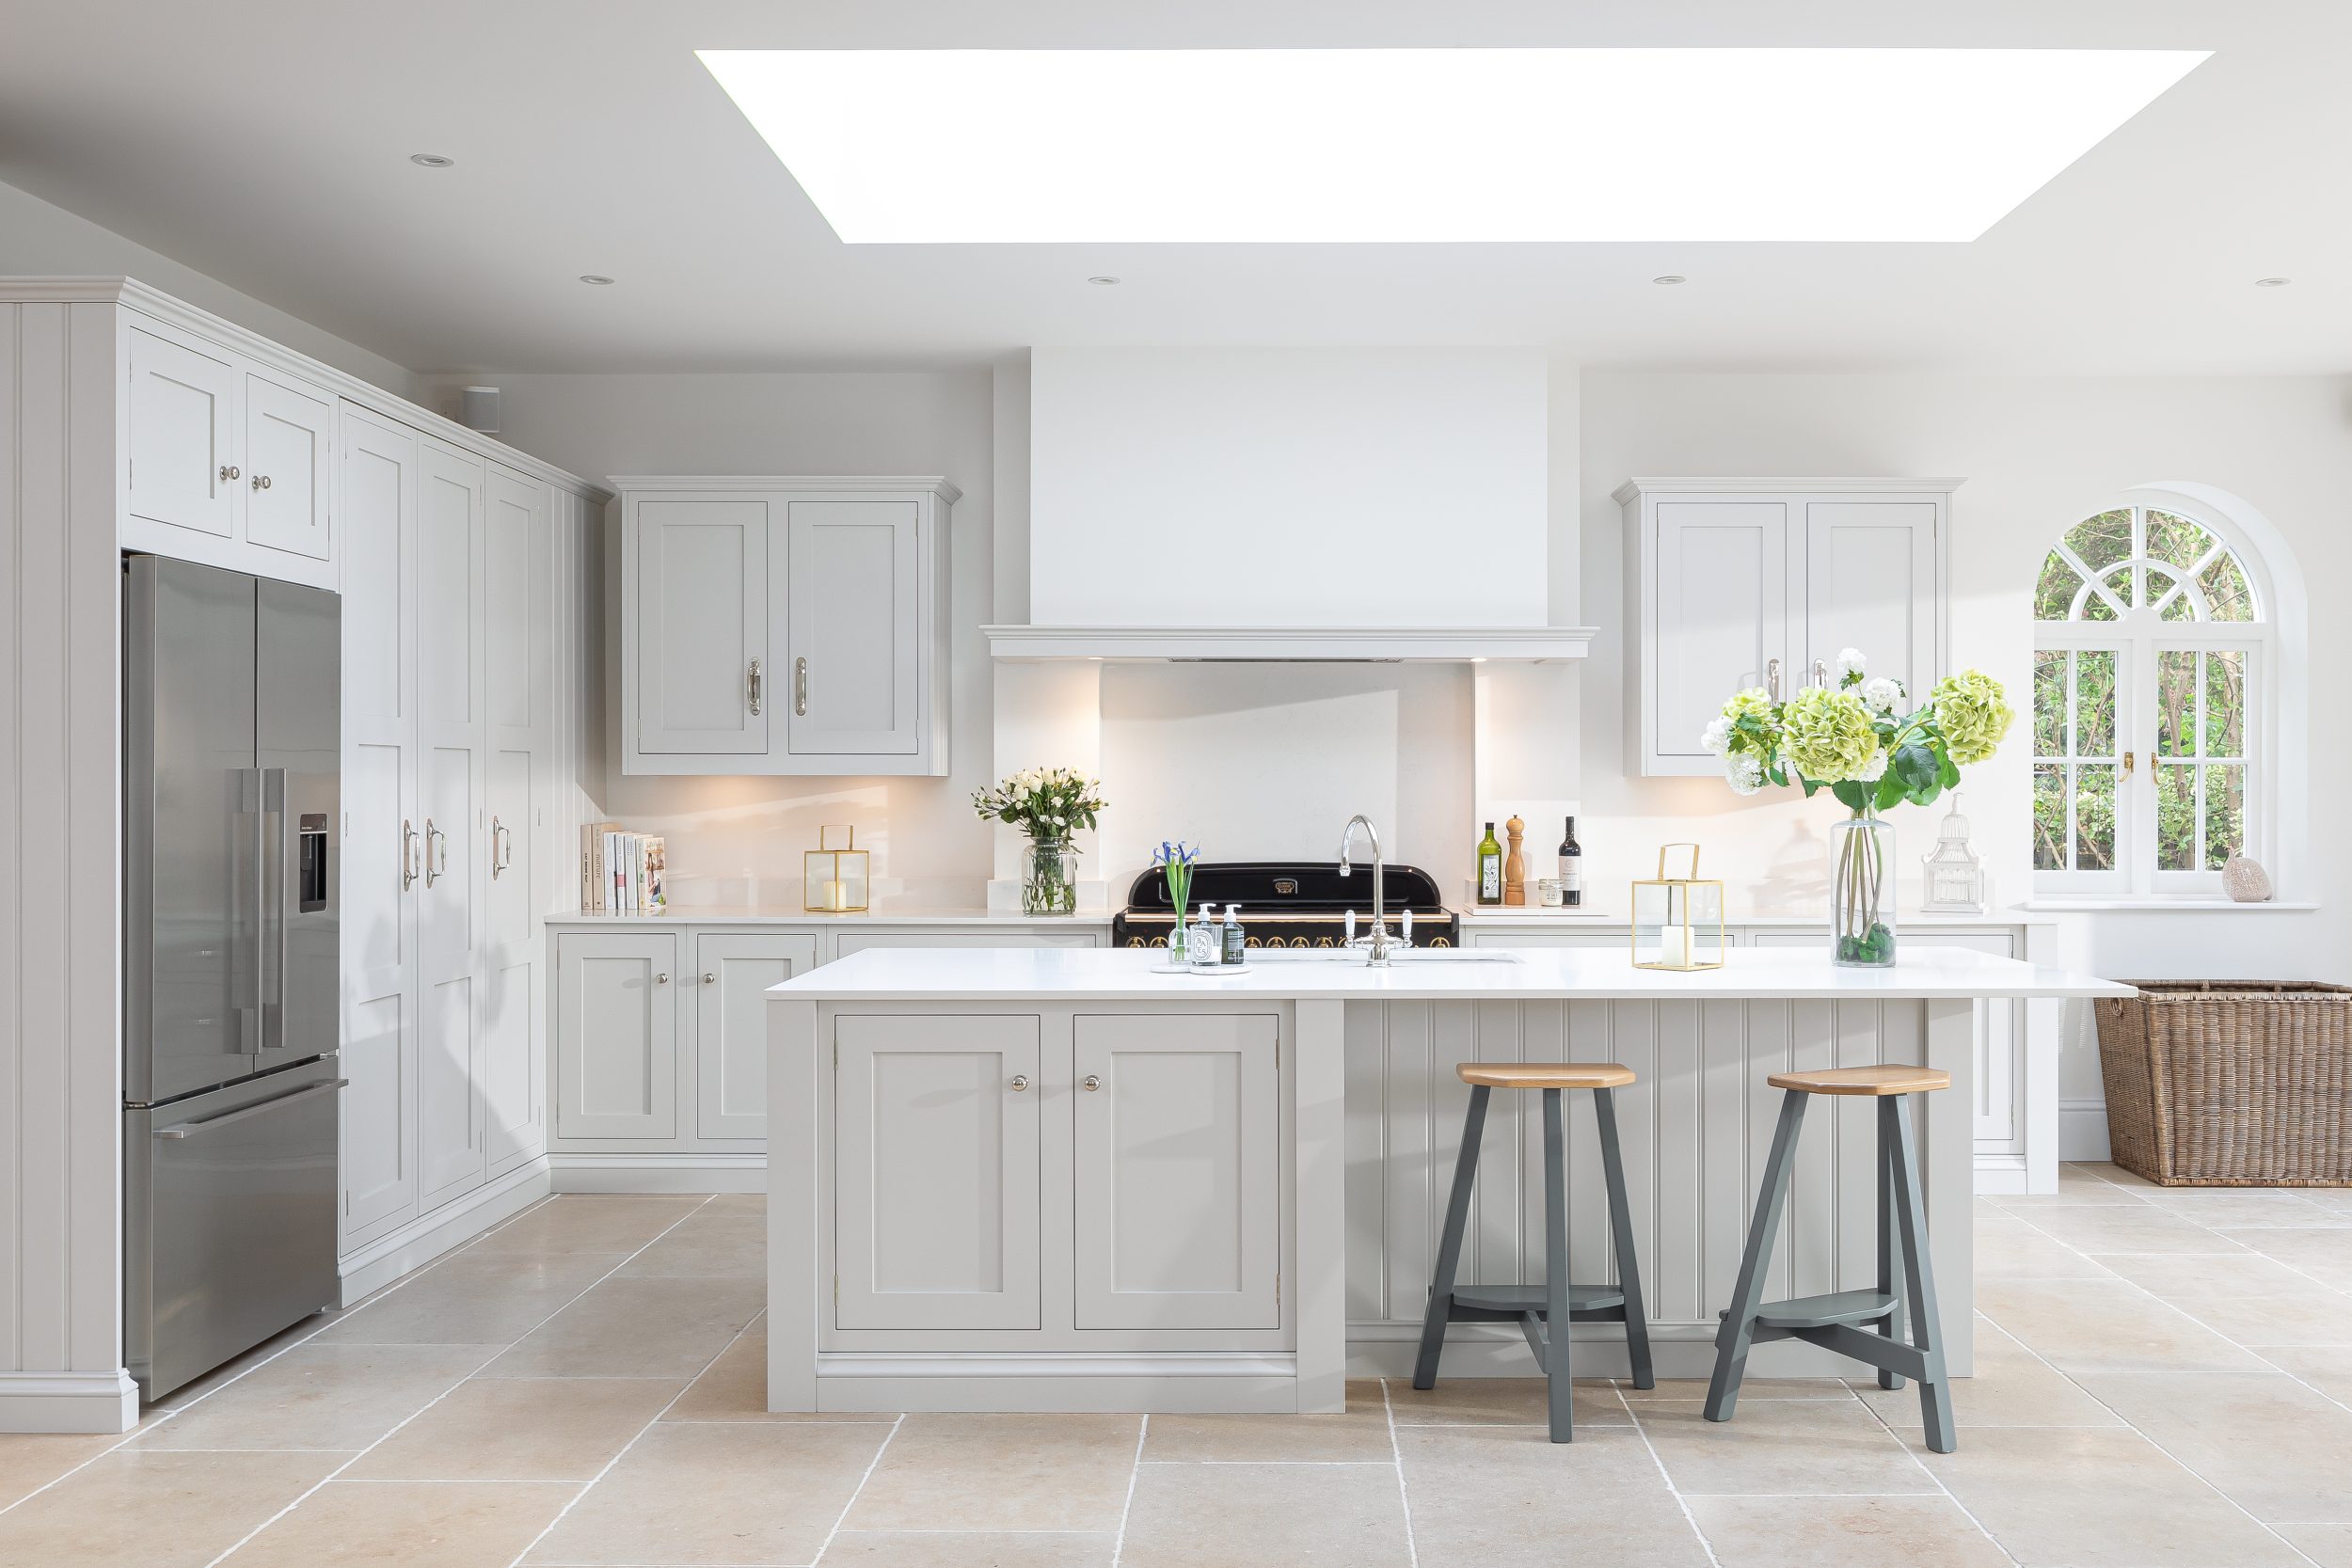 John Lewis of Hungerford shaker style kitchen in grey